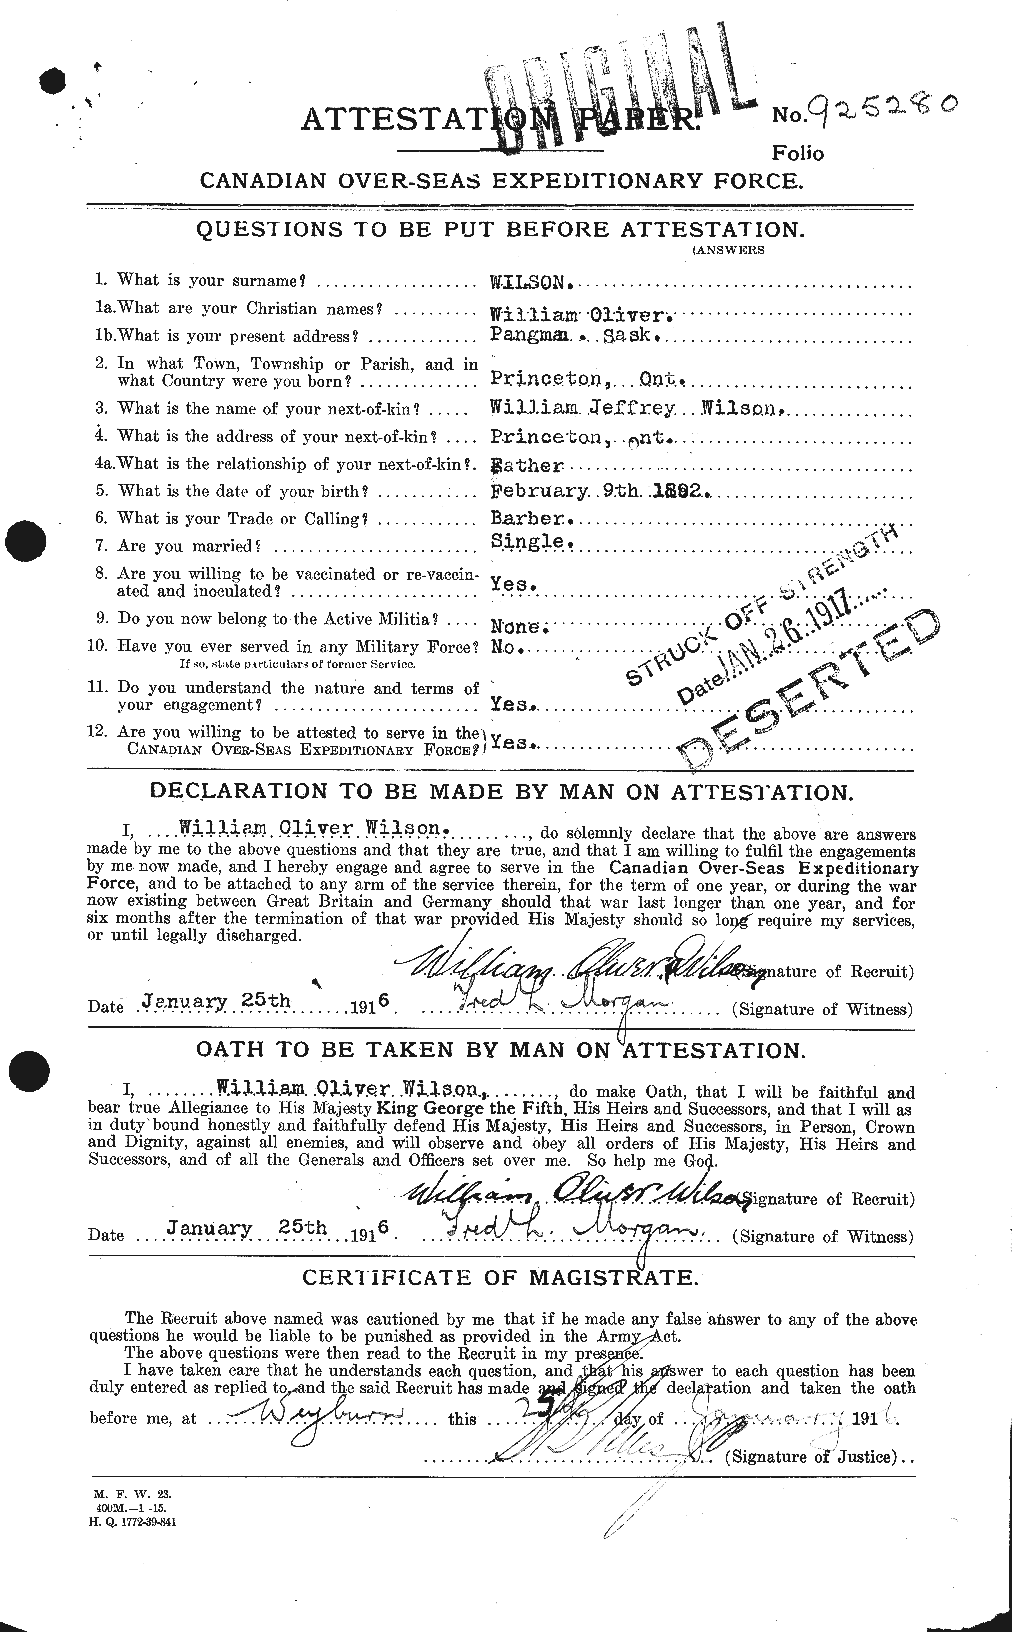 Personnel Records of the First World War - CEF 684084a